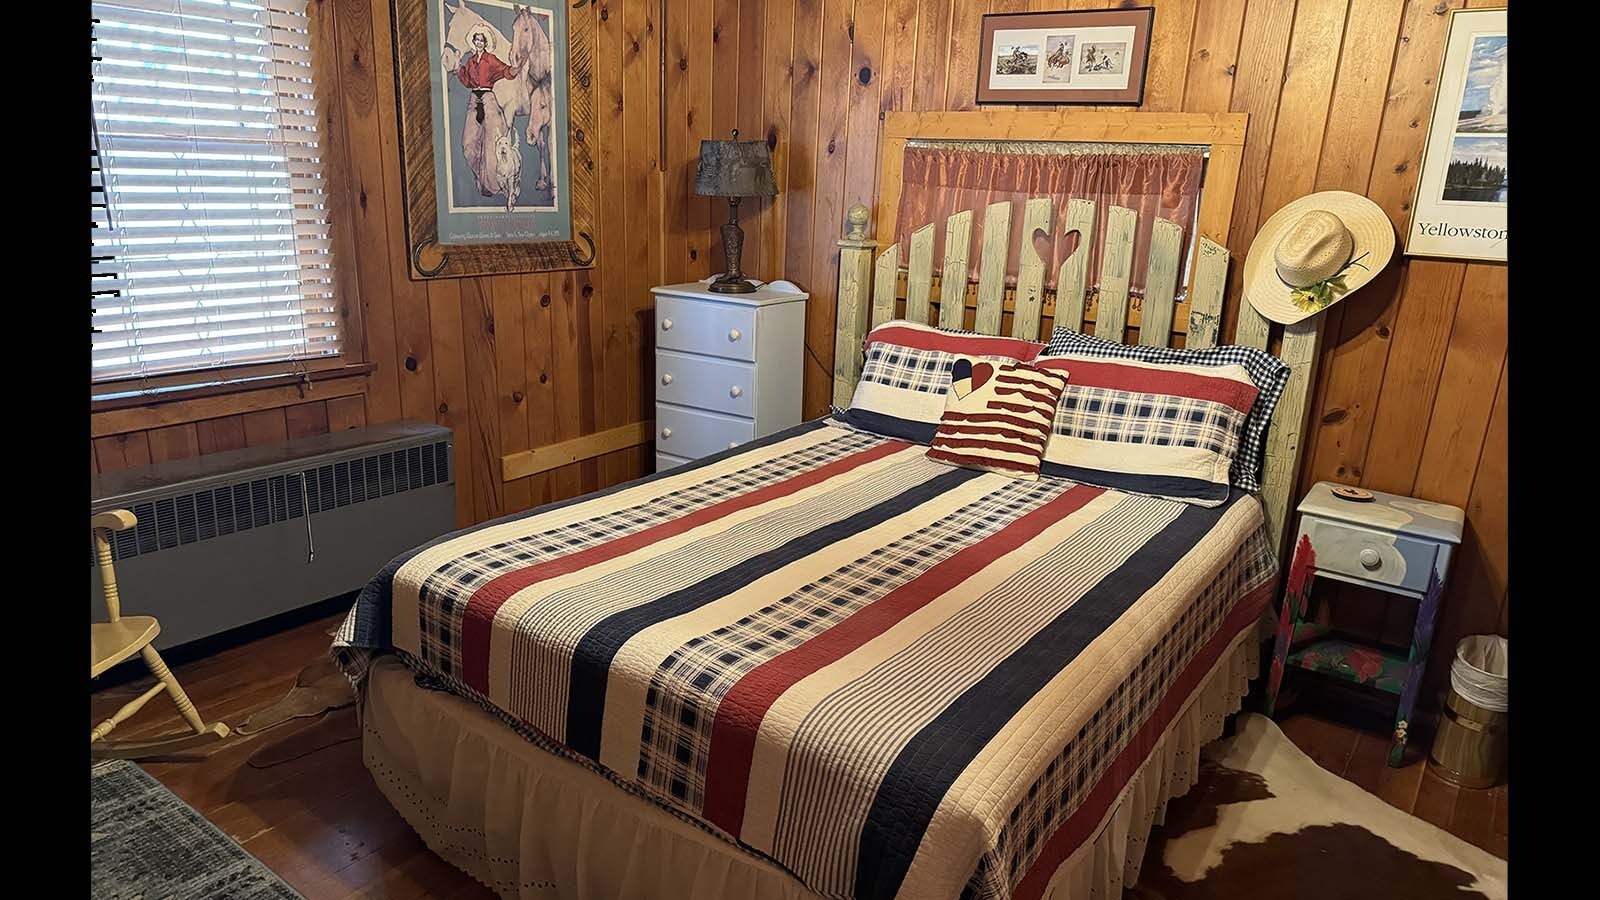 This bedroom in the Molesworth House is pure Western with a little whimsy.